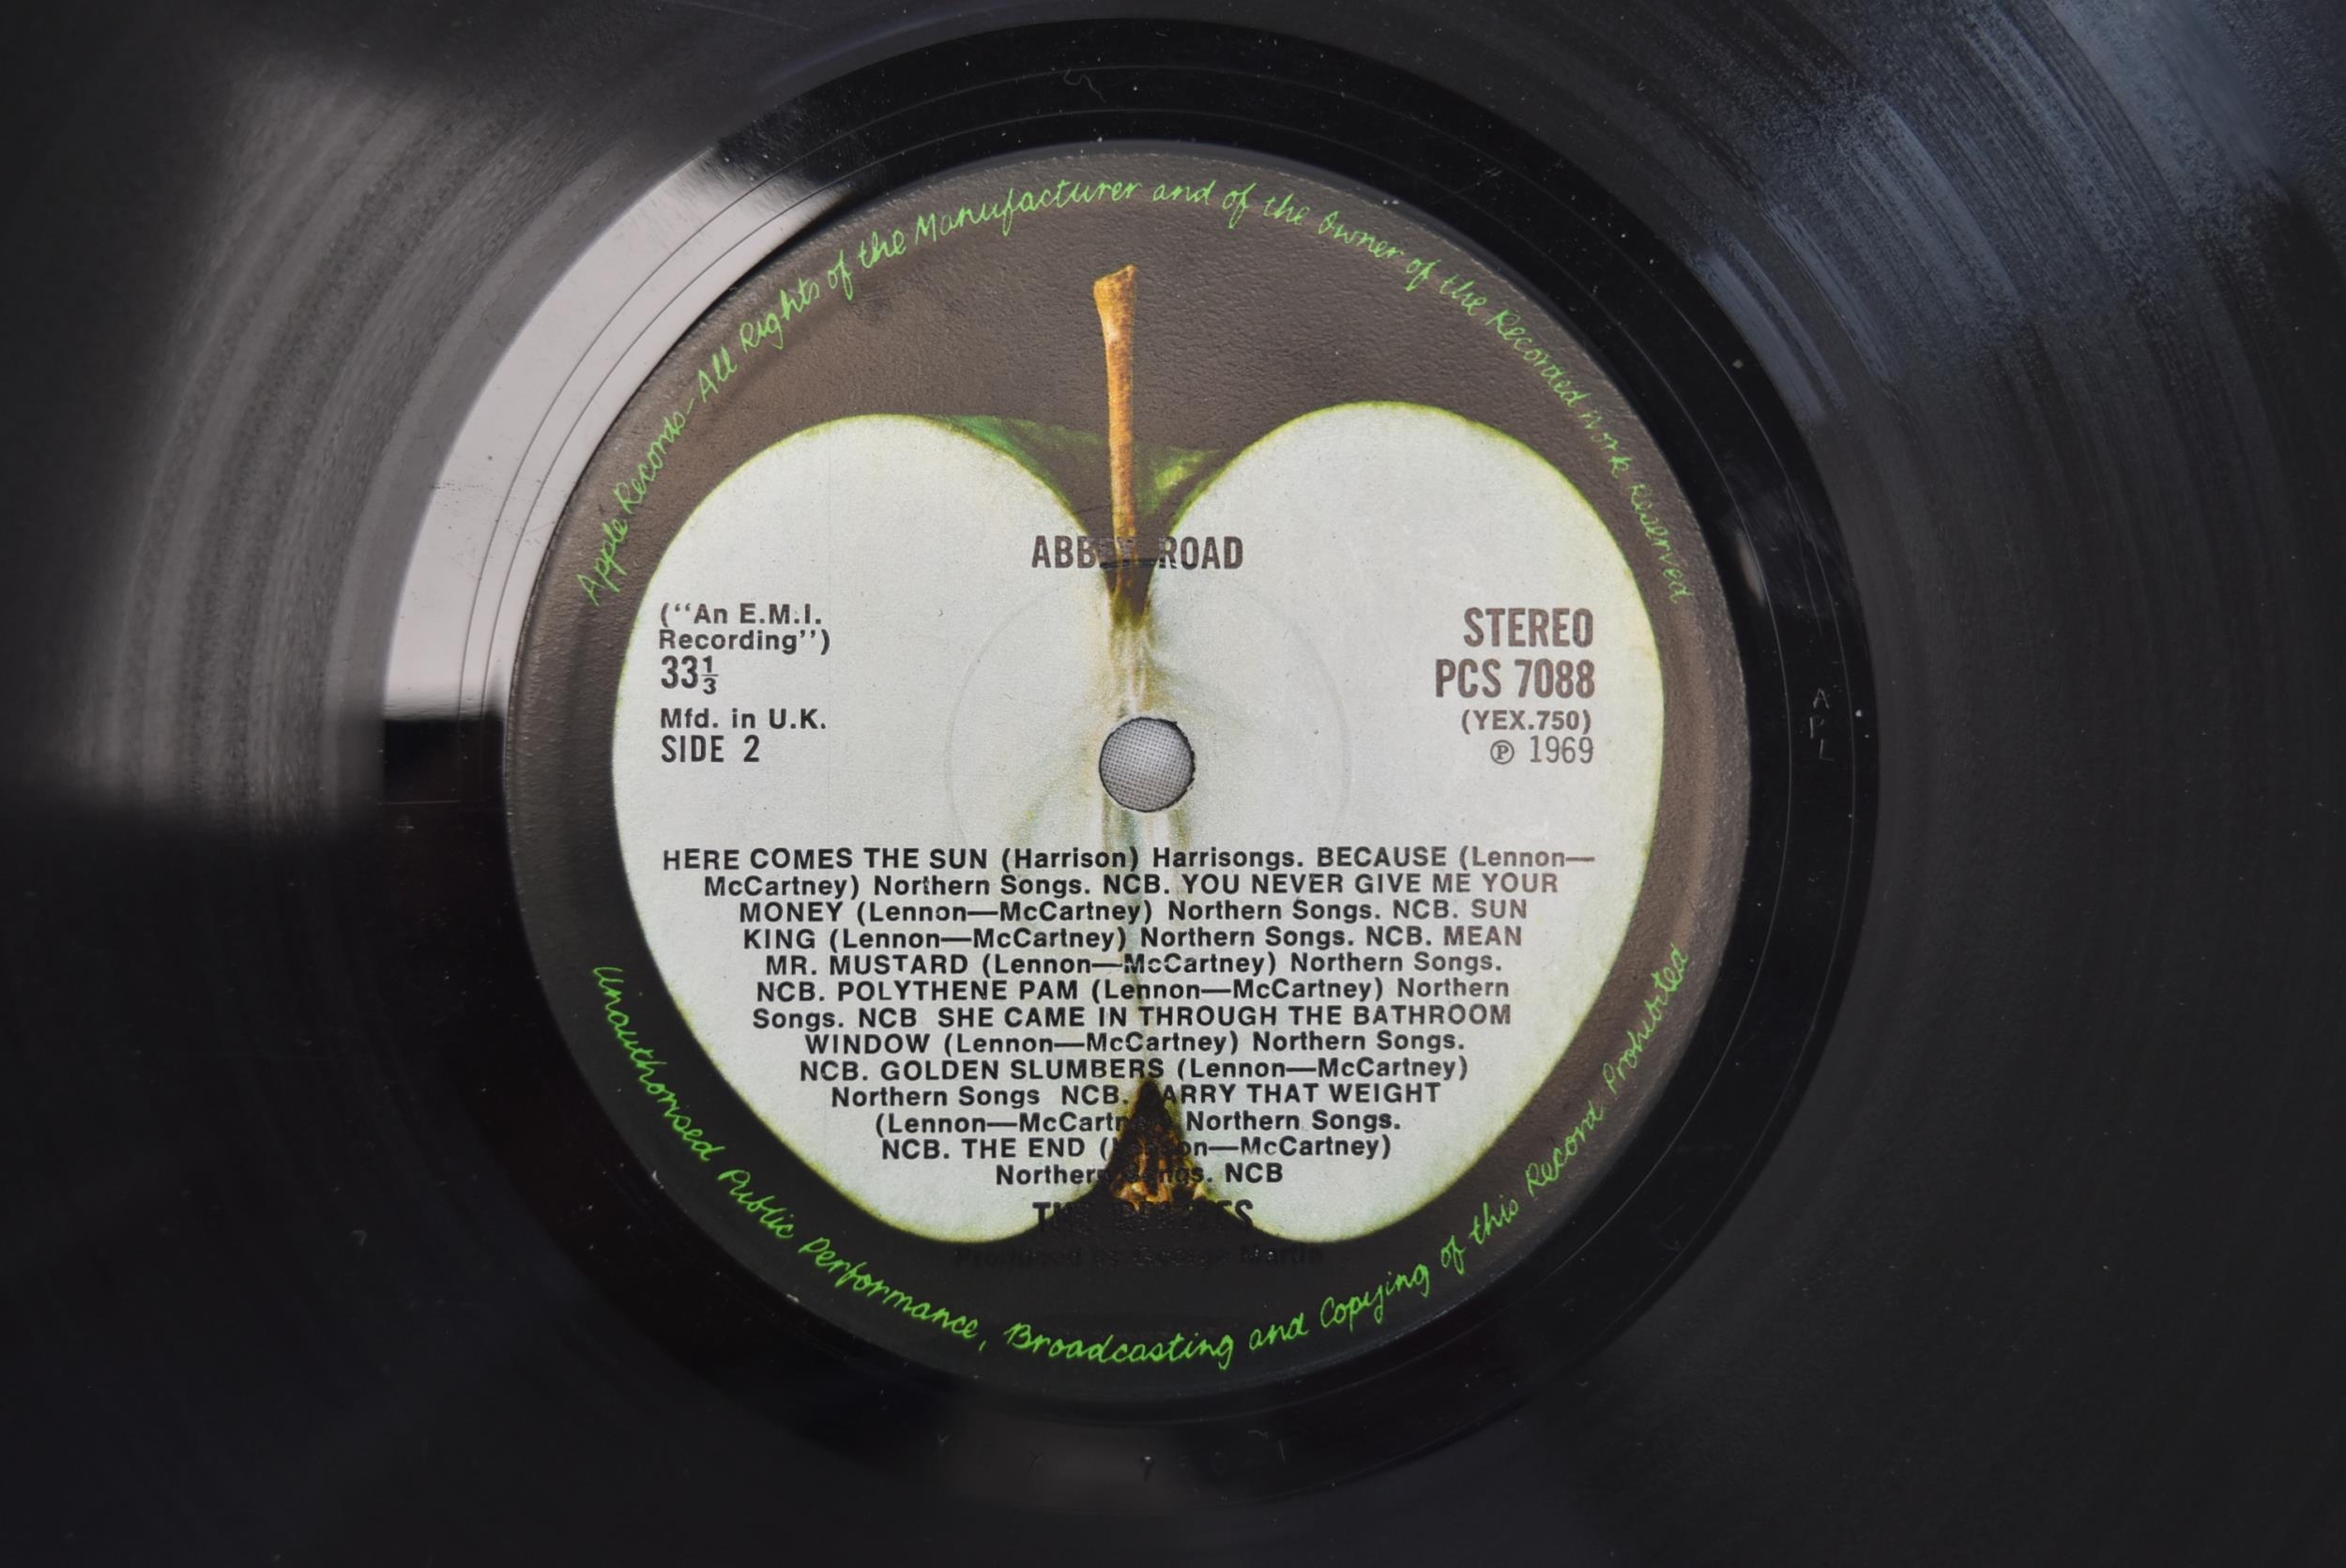 Beatles, Abbey Road. UK first pressing. Rare LP cover with misprints. Good condition. - Image 4 of 5